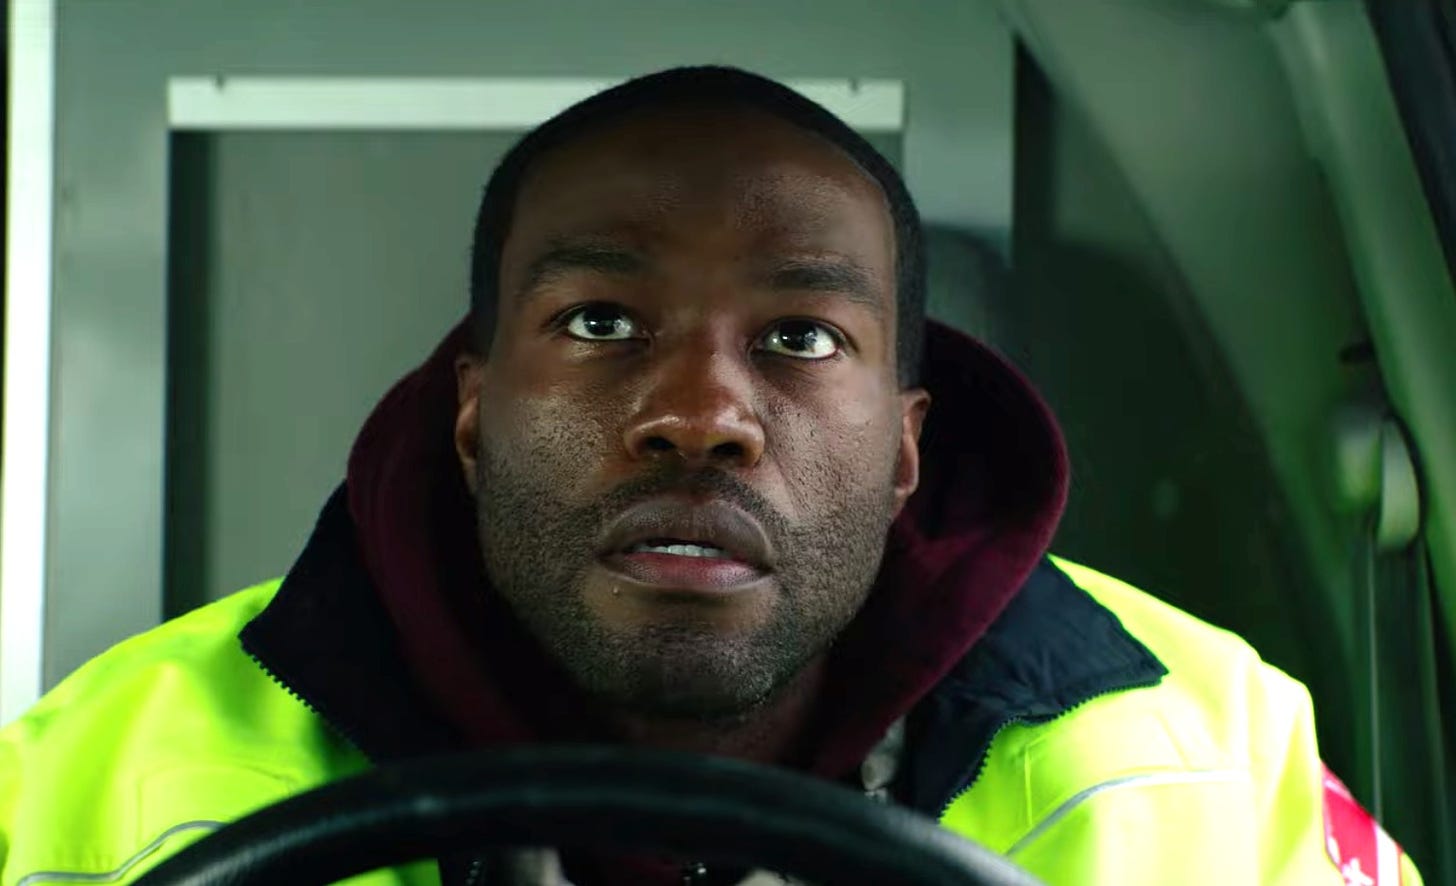 Ambulance' Trailer: Yahya Abdul-Mateen II And Jake Gyllenhaal As Brothers  In Michael Bay Thriller - SHADOW & ACT